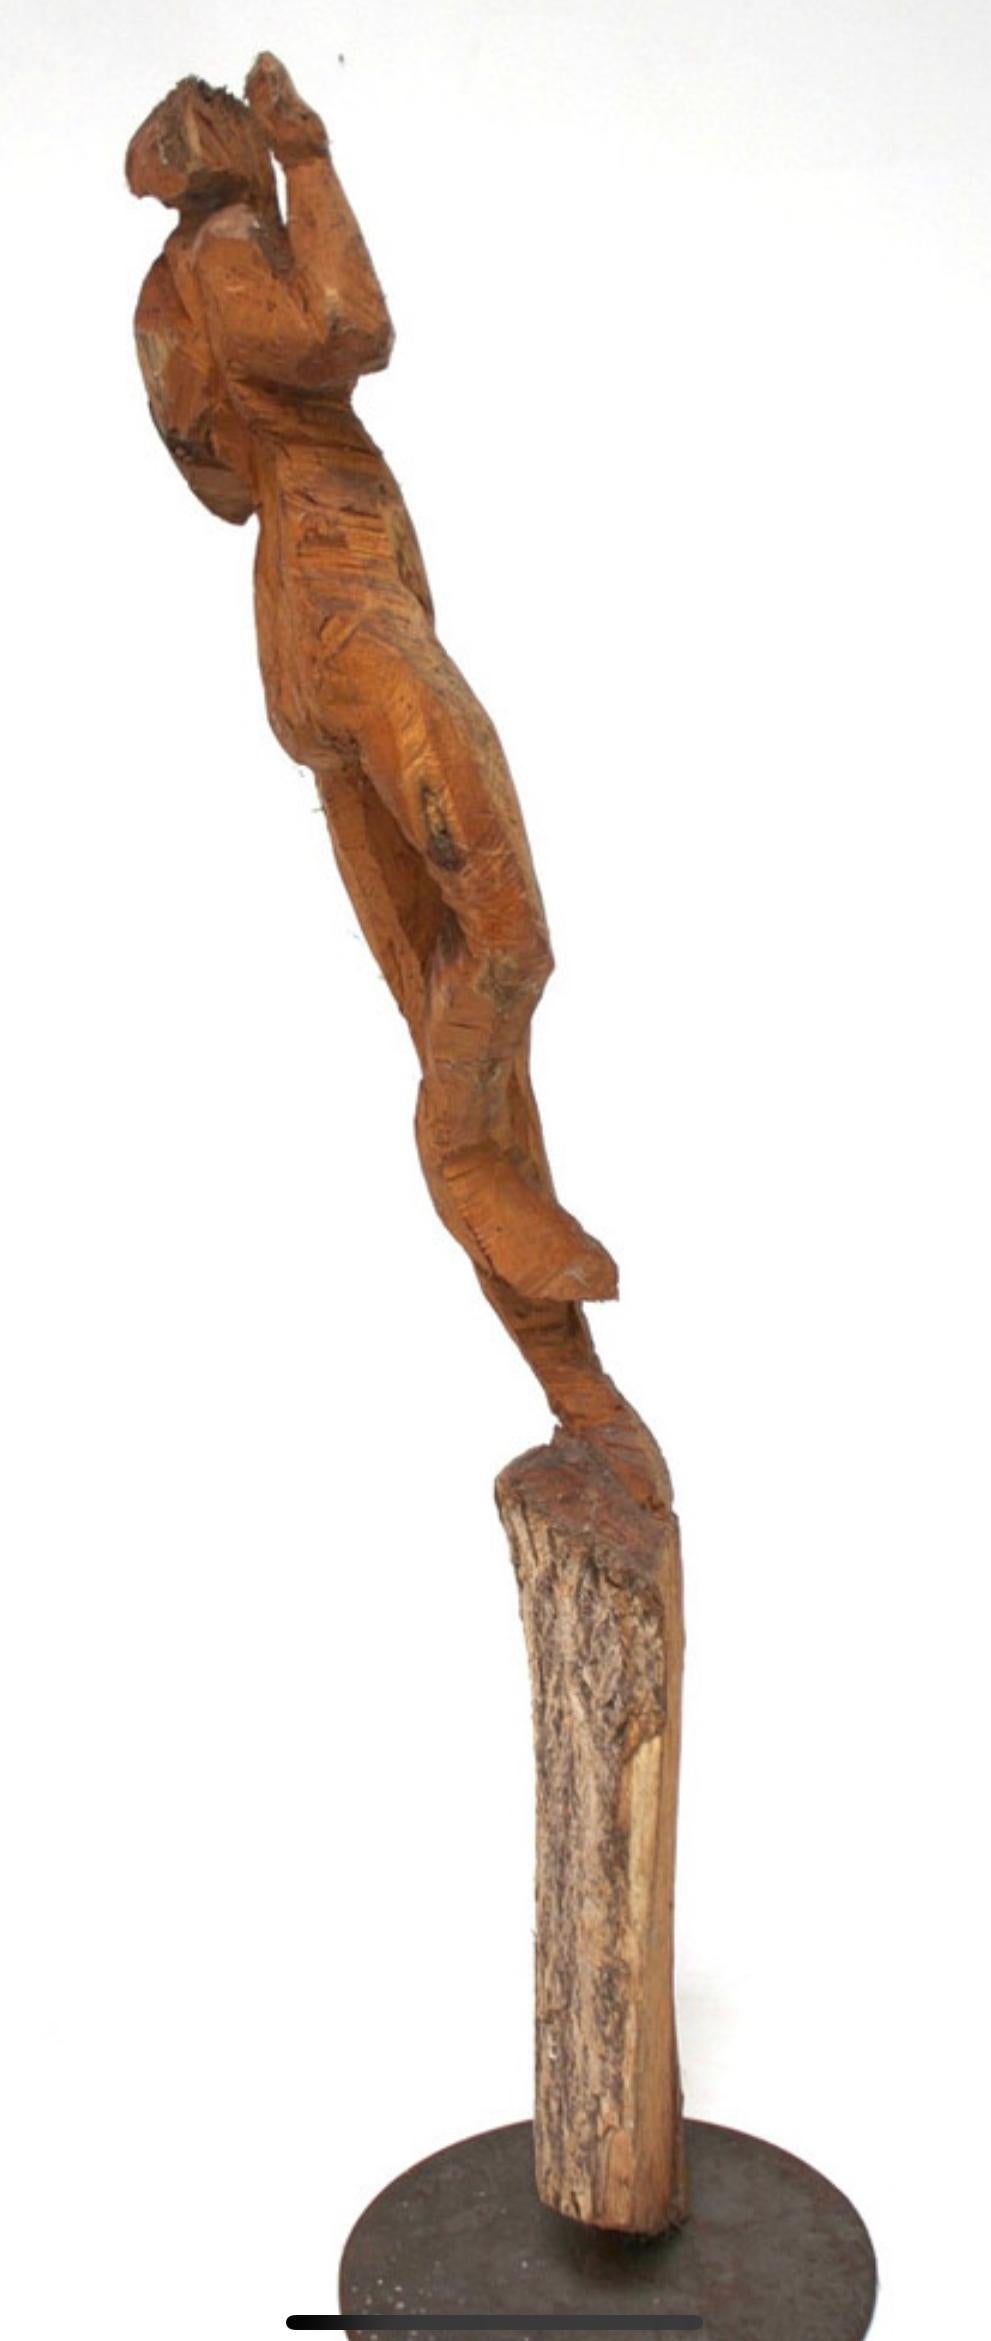 Hand-Carved Charlott Szukala, Sculpture, 'Female Nude', Hand Carved in Wood, Germany 2010 For Sale